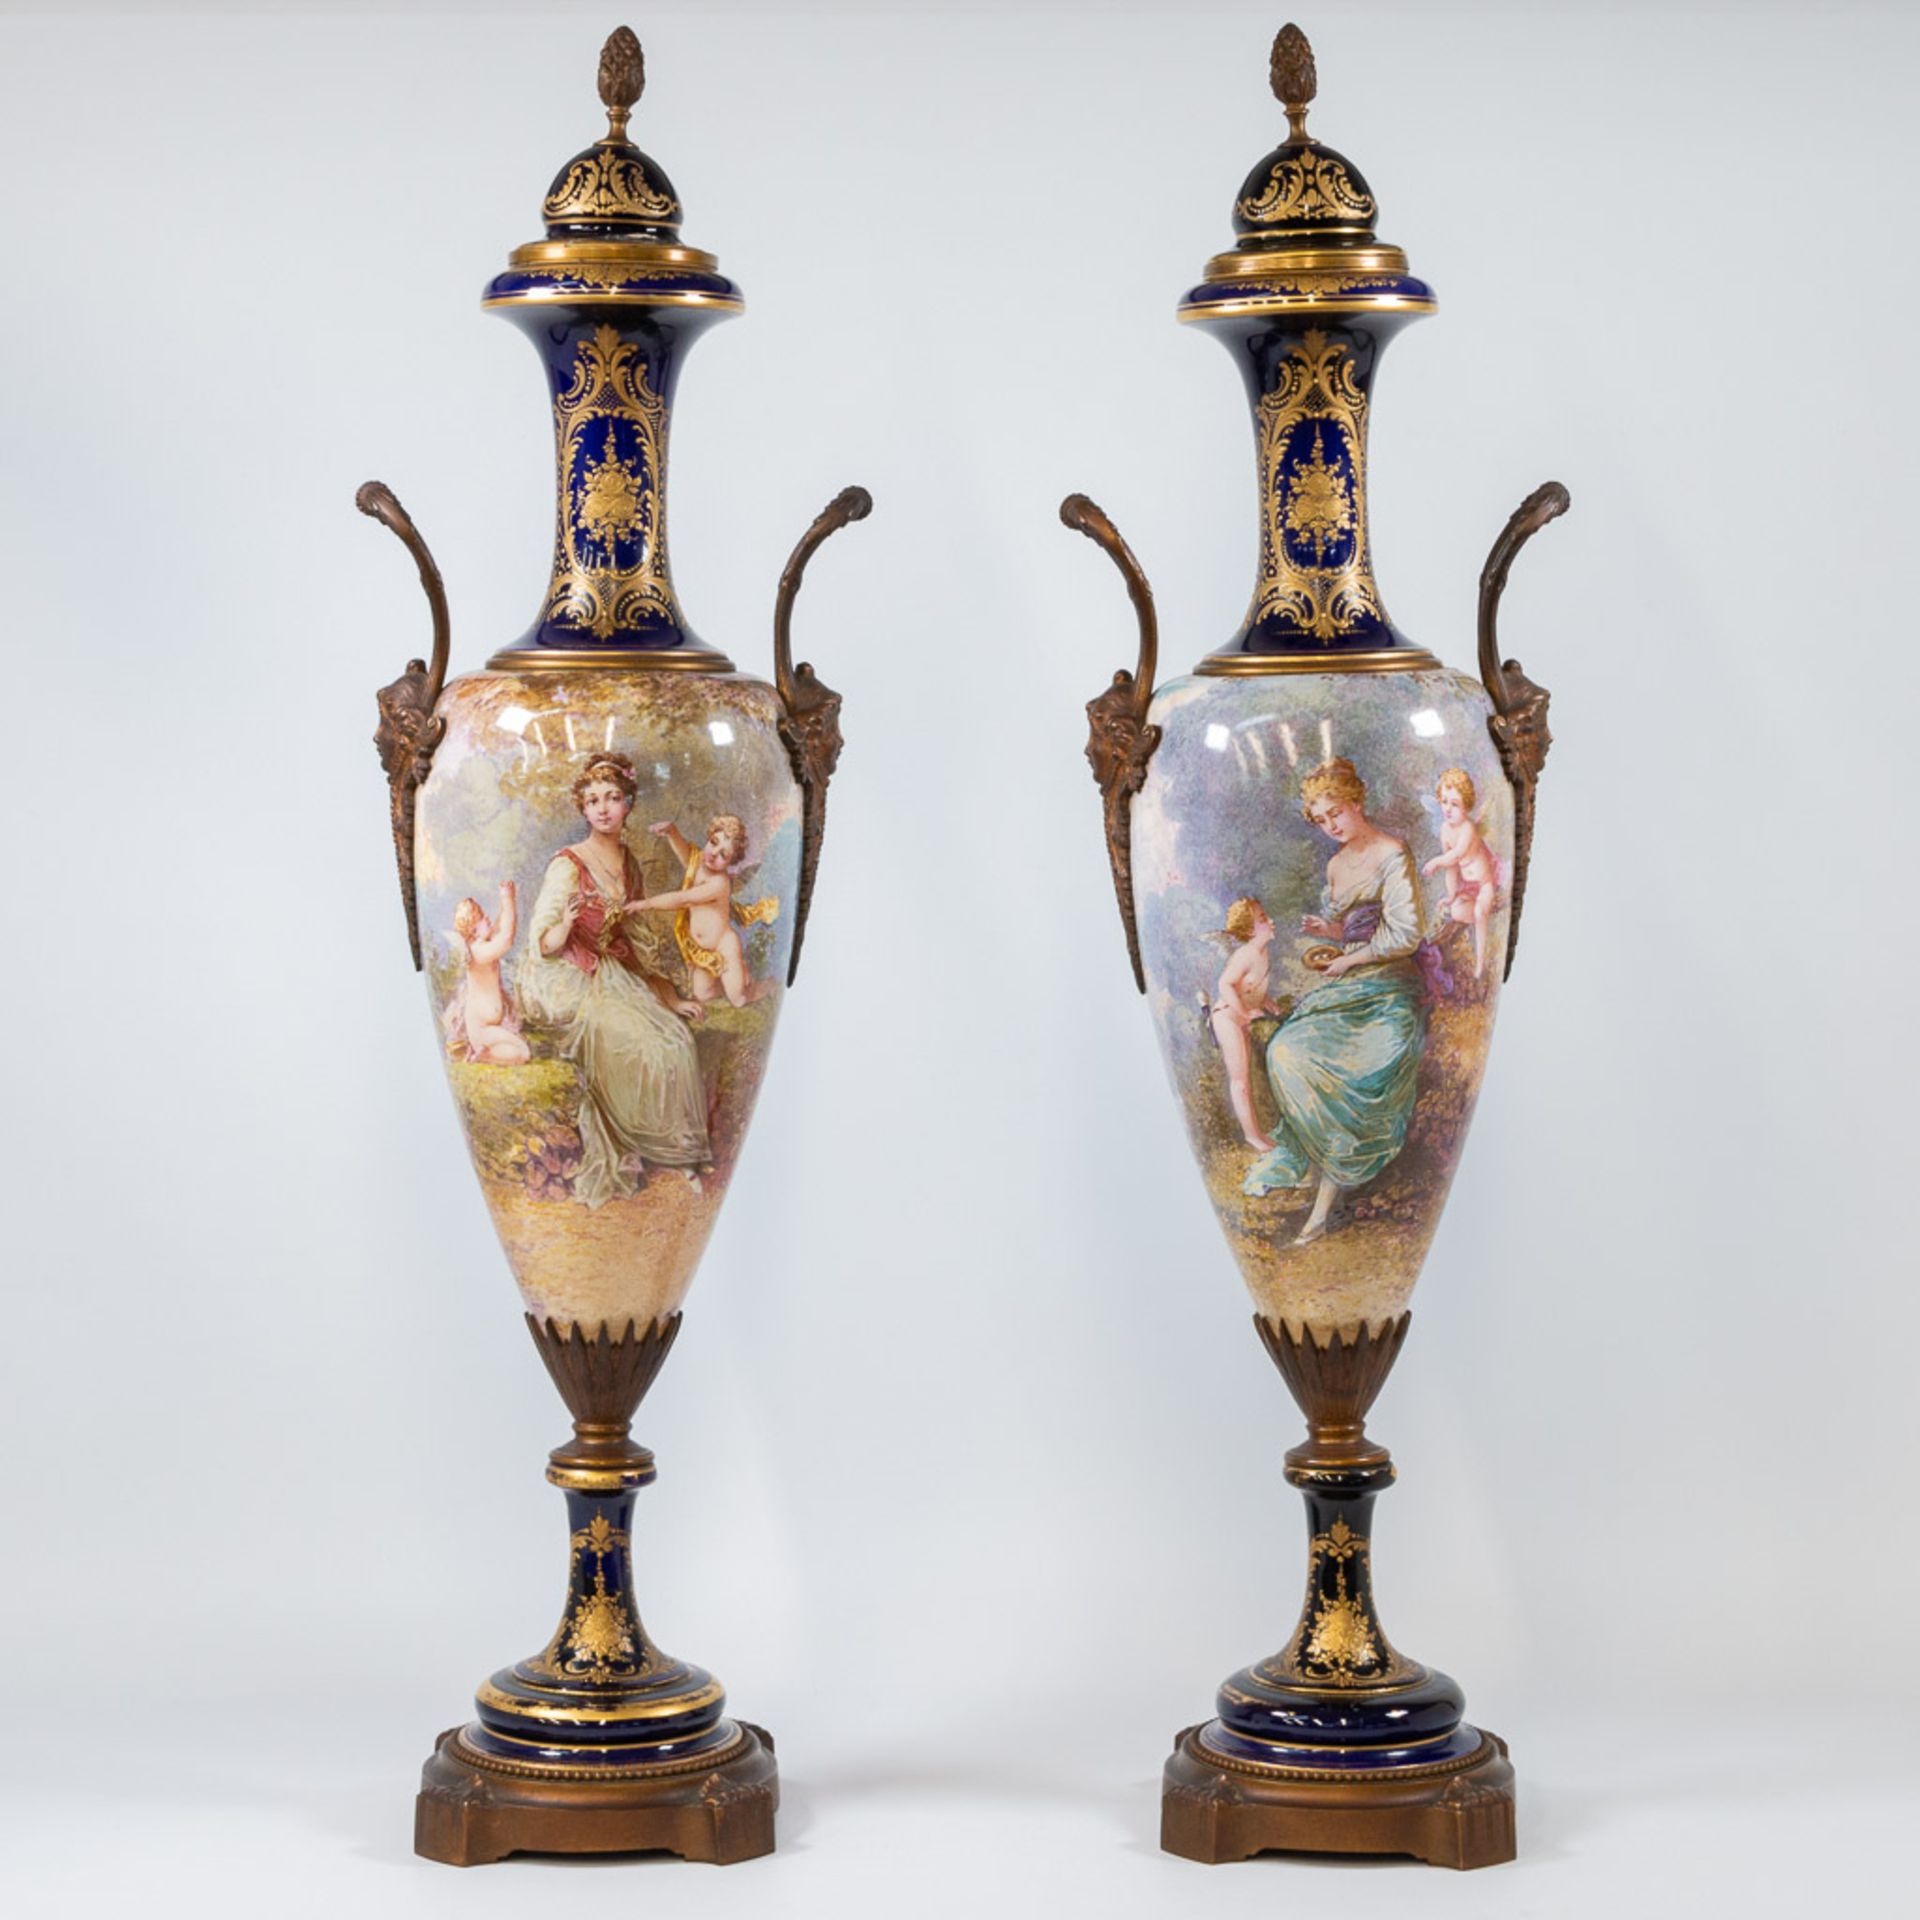 A pair of Sèvres vases with lid, cobalt blue with a decor of ladies and landscapes. 19th century.